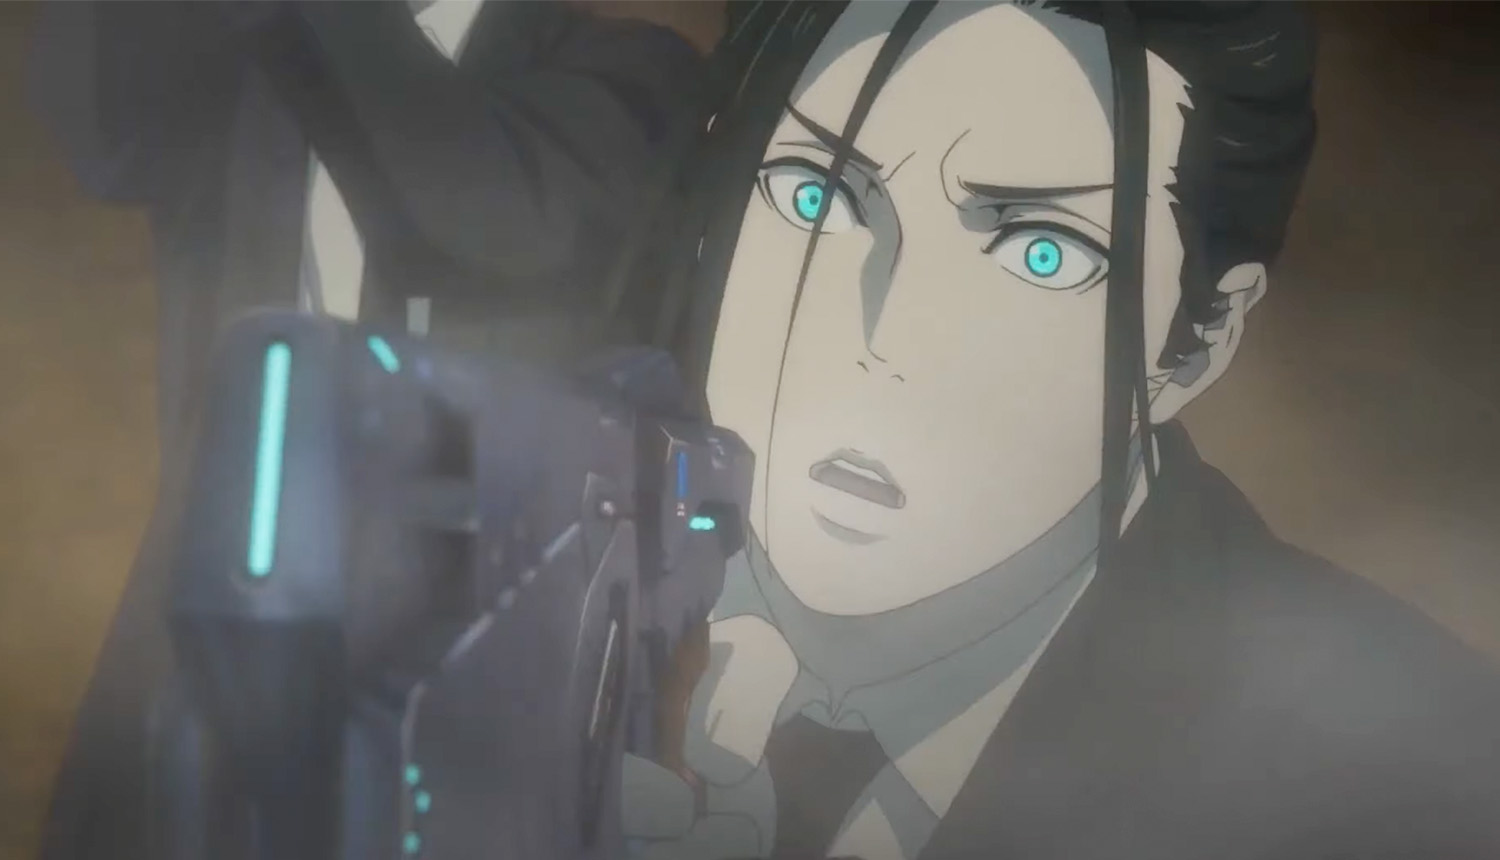 Psycho-Pass: Providence - Official Trailer